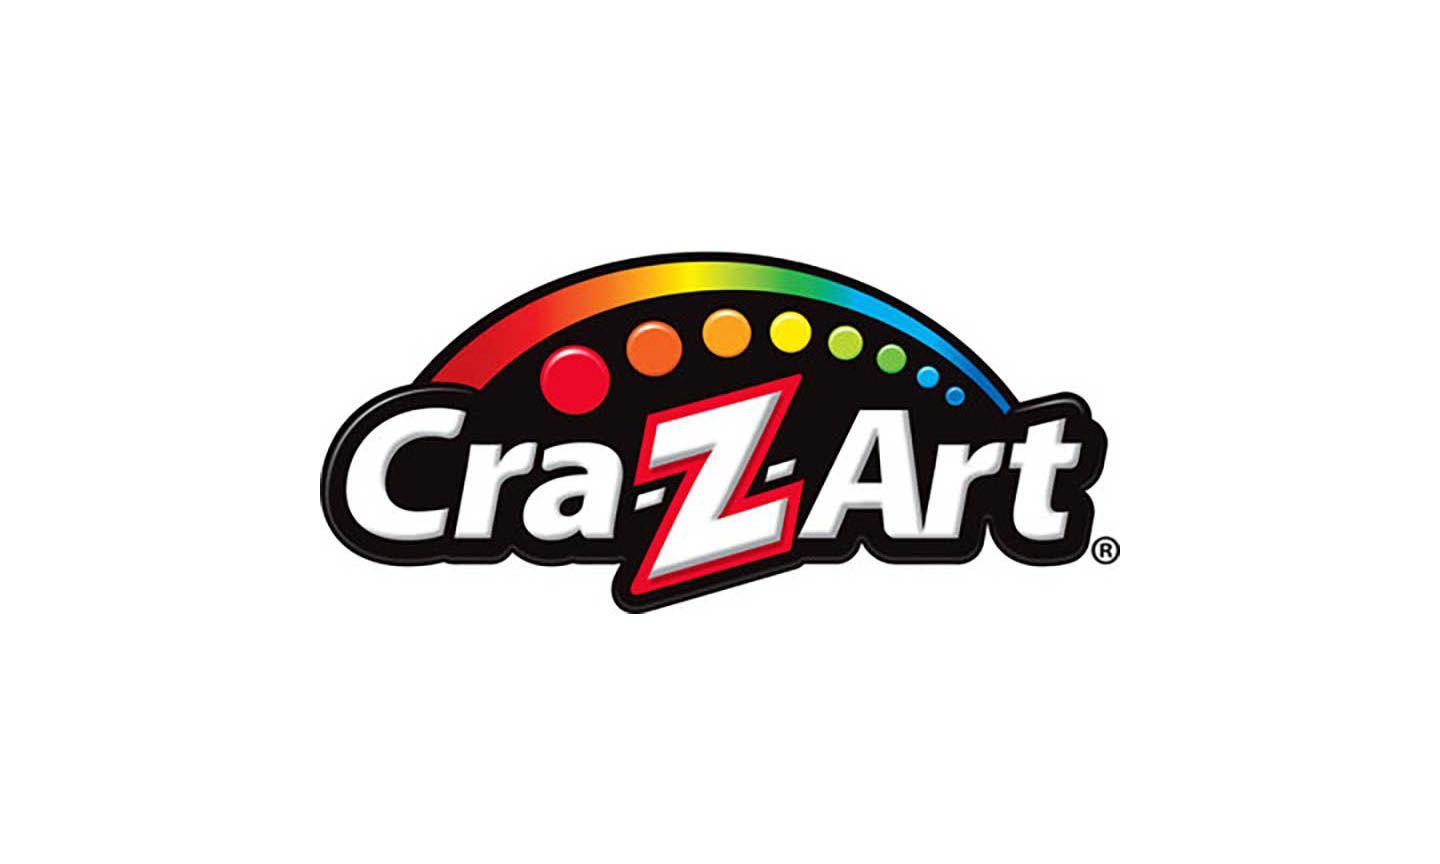 Cra-Z-Art Logo - Cra Z Art Donating $10K In Toys To Children's Charities For The Holidays